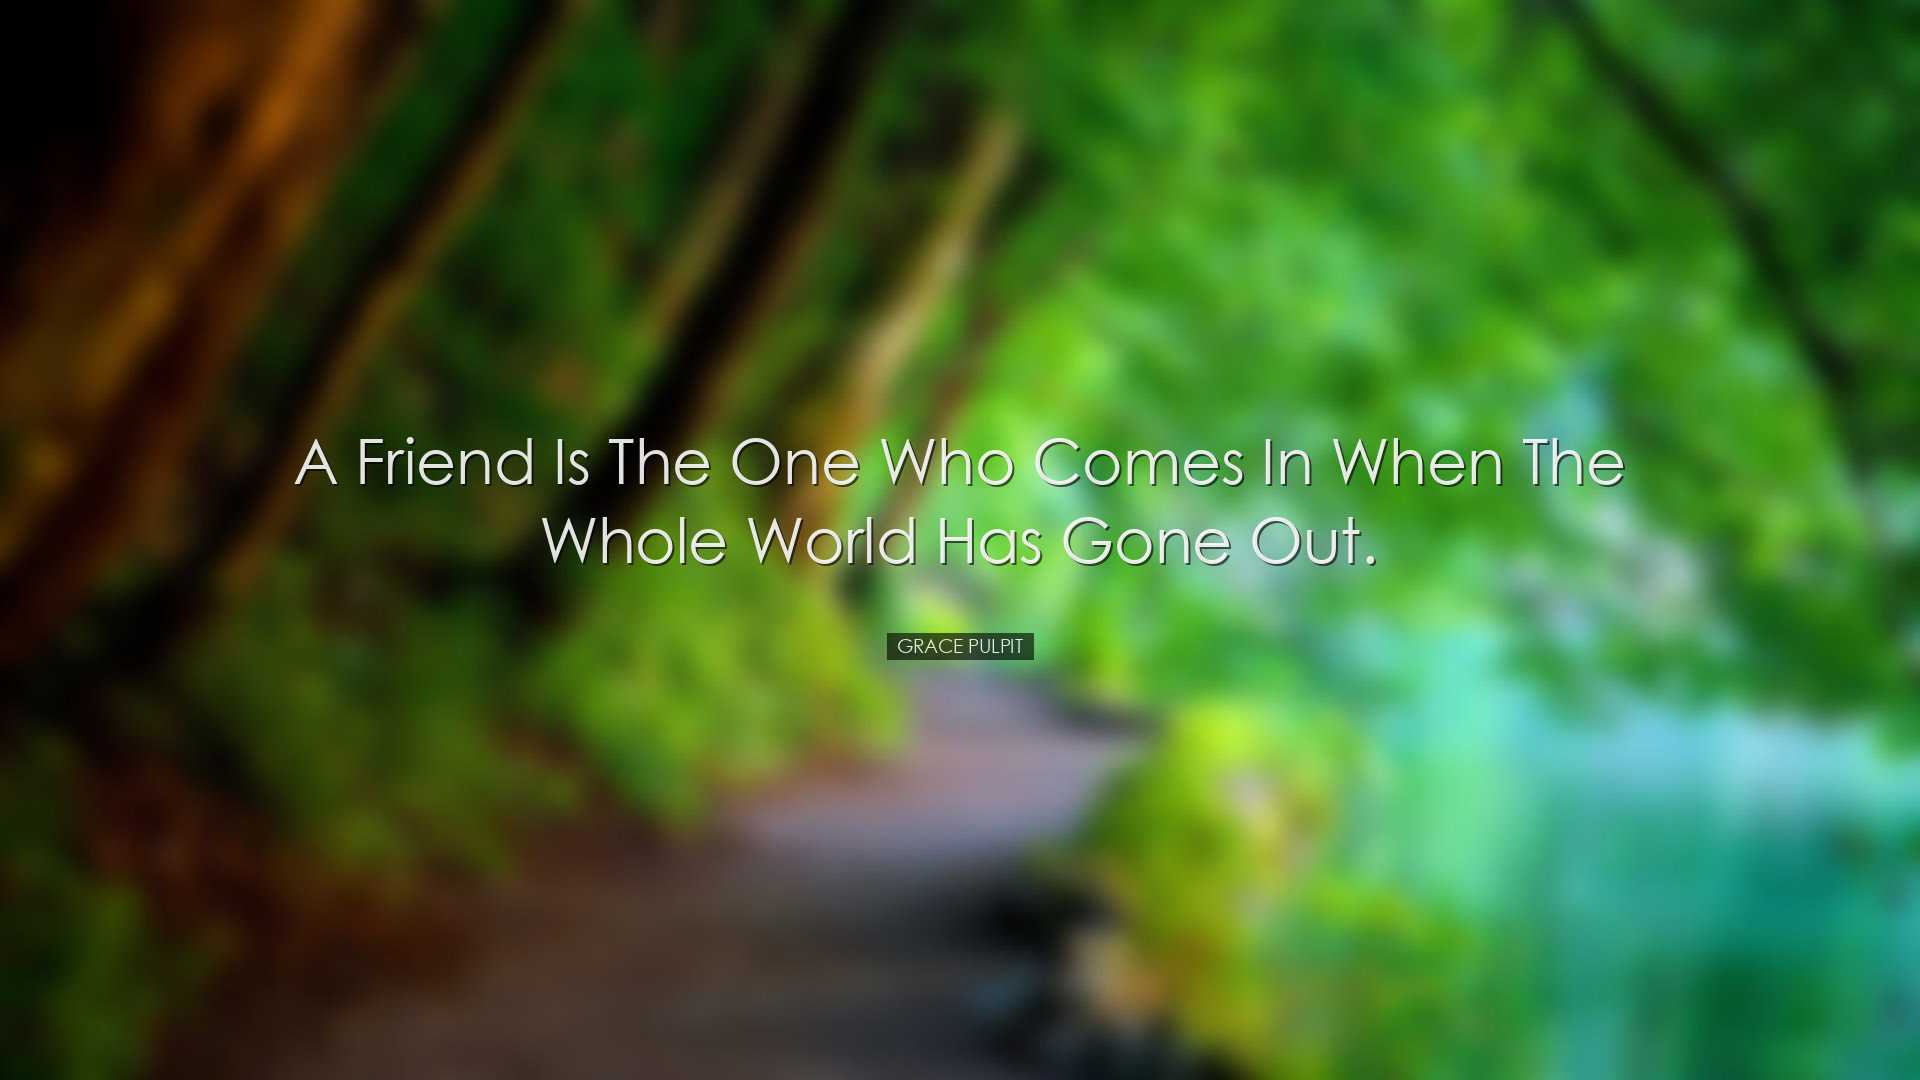 A friend is the one who comes in when the whole world has gone out